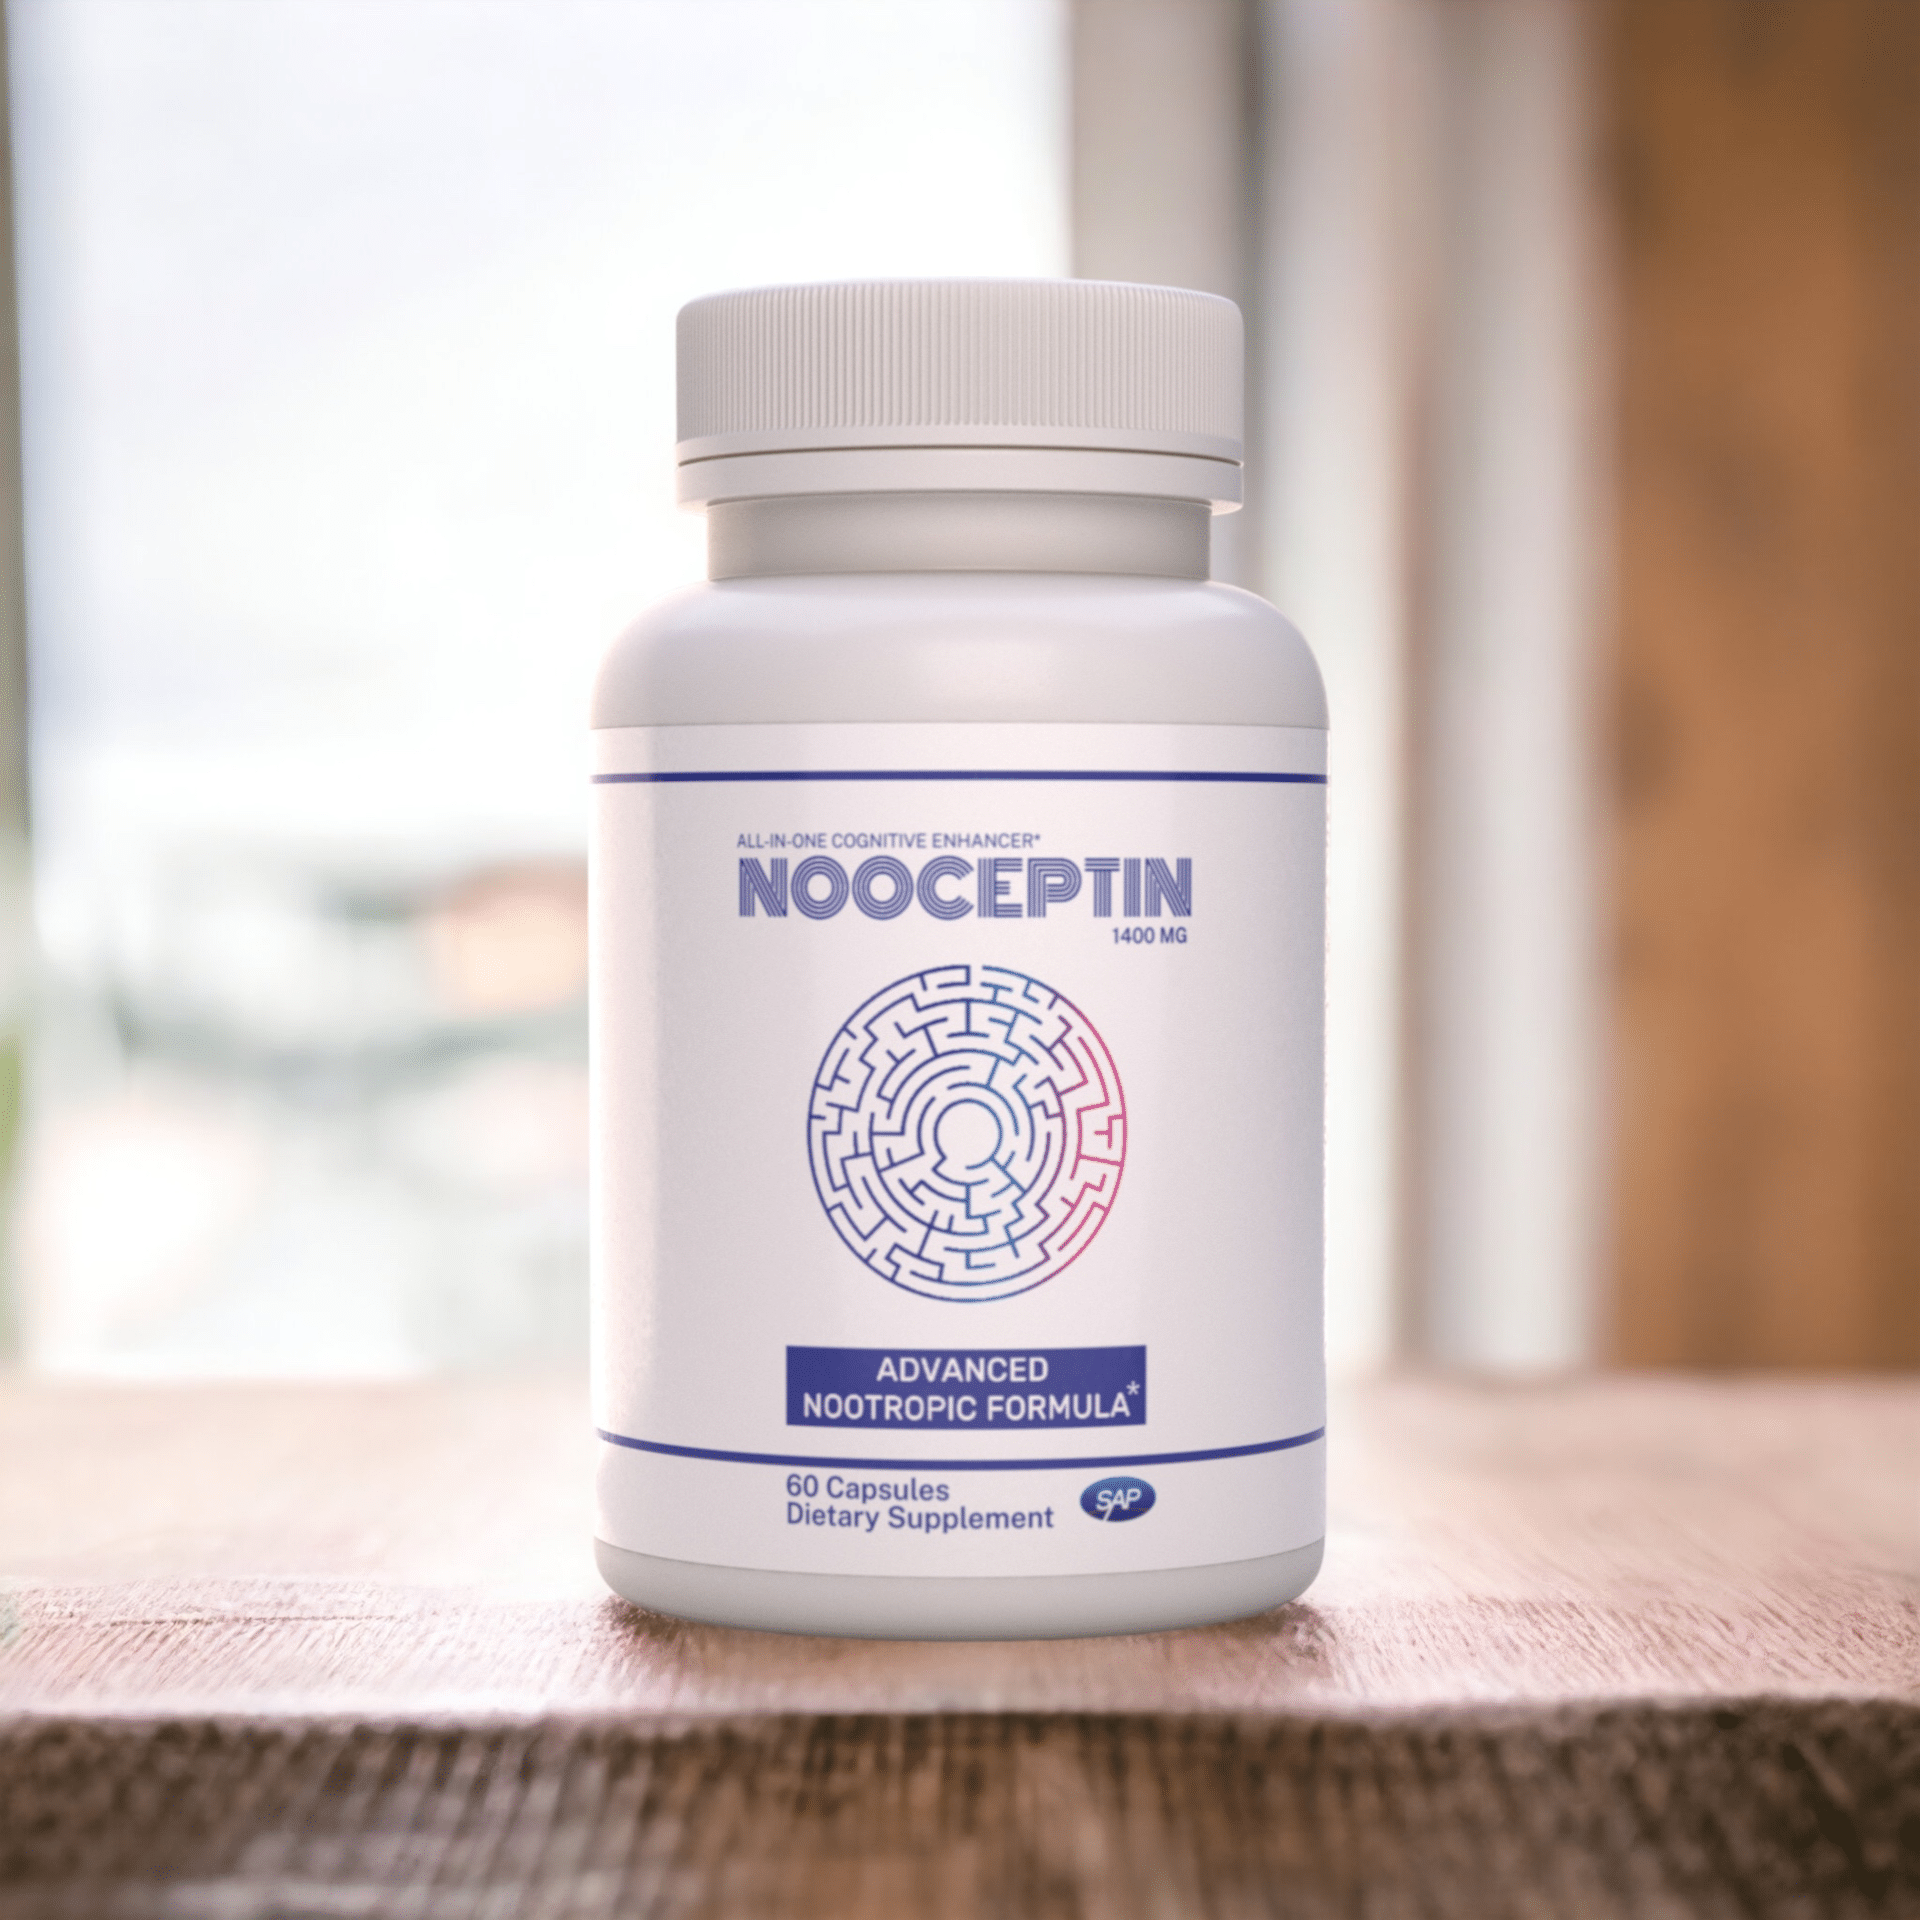 Nooceptin Best Nootropic For Cognitive Performance And Brain Health Review